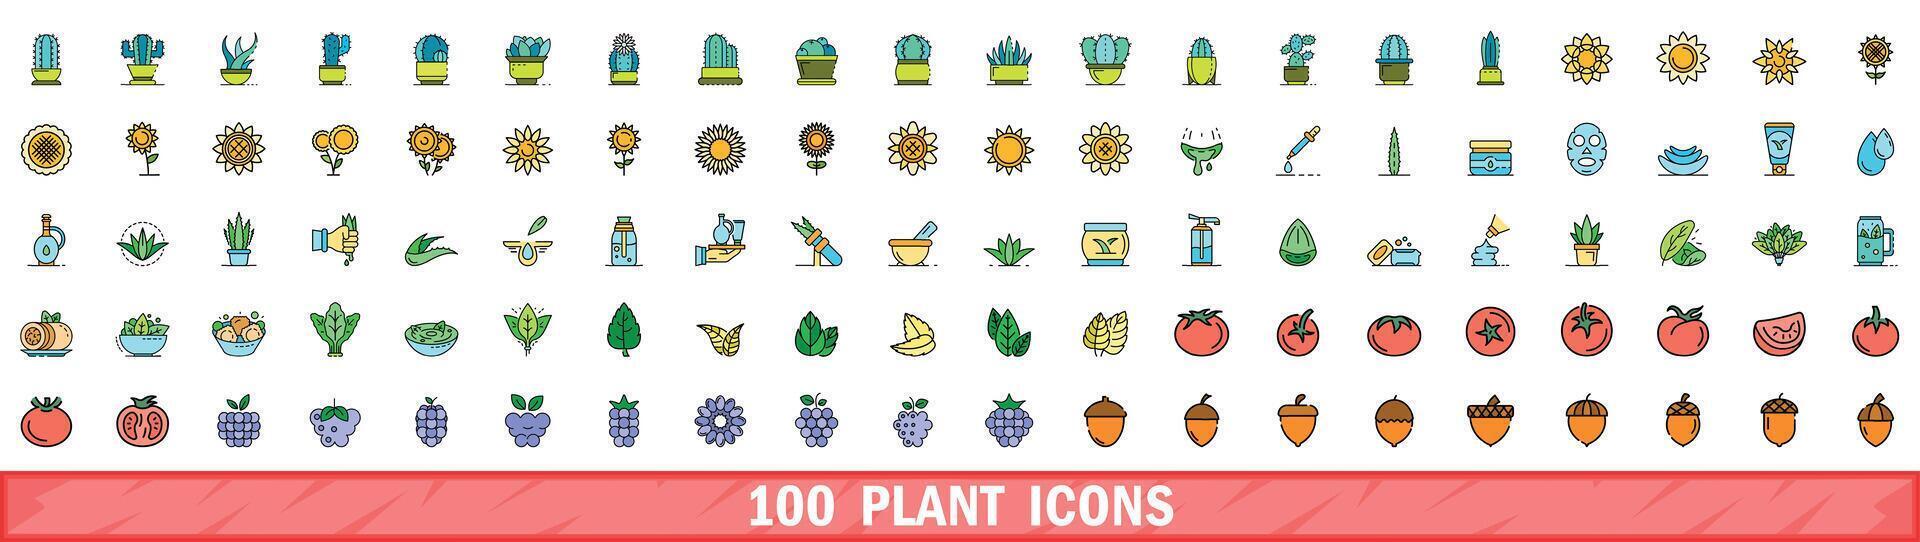 100 plant icons set, color line style vector